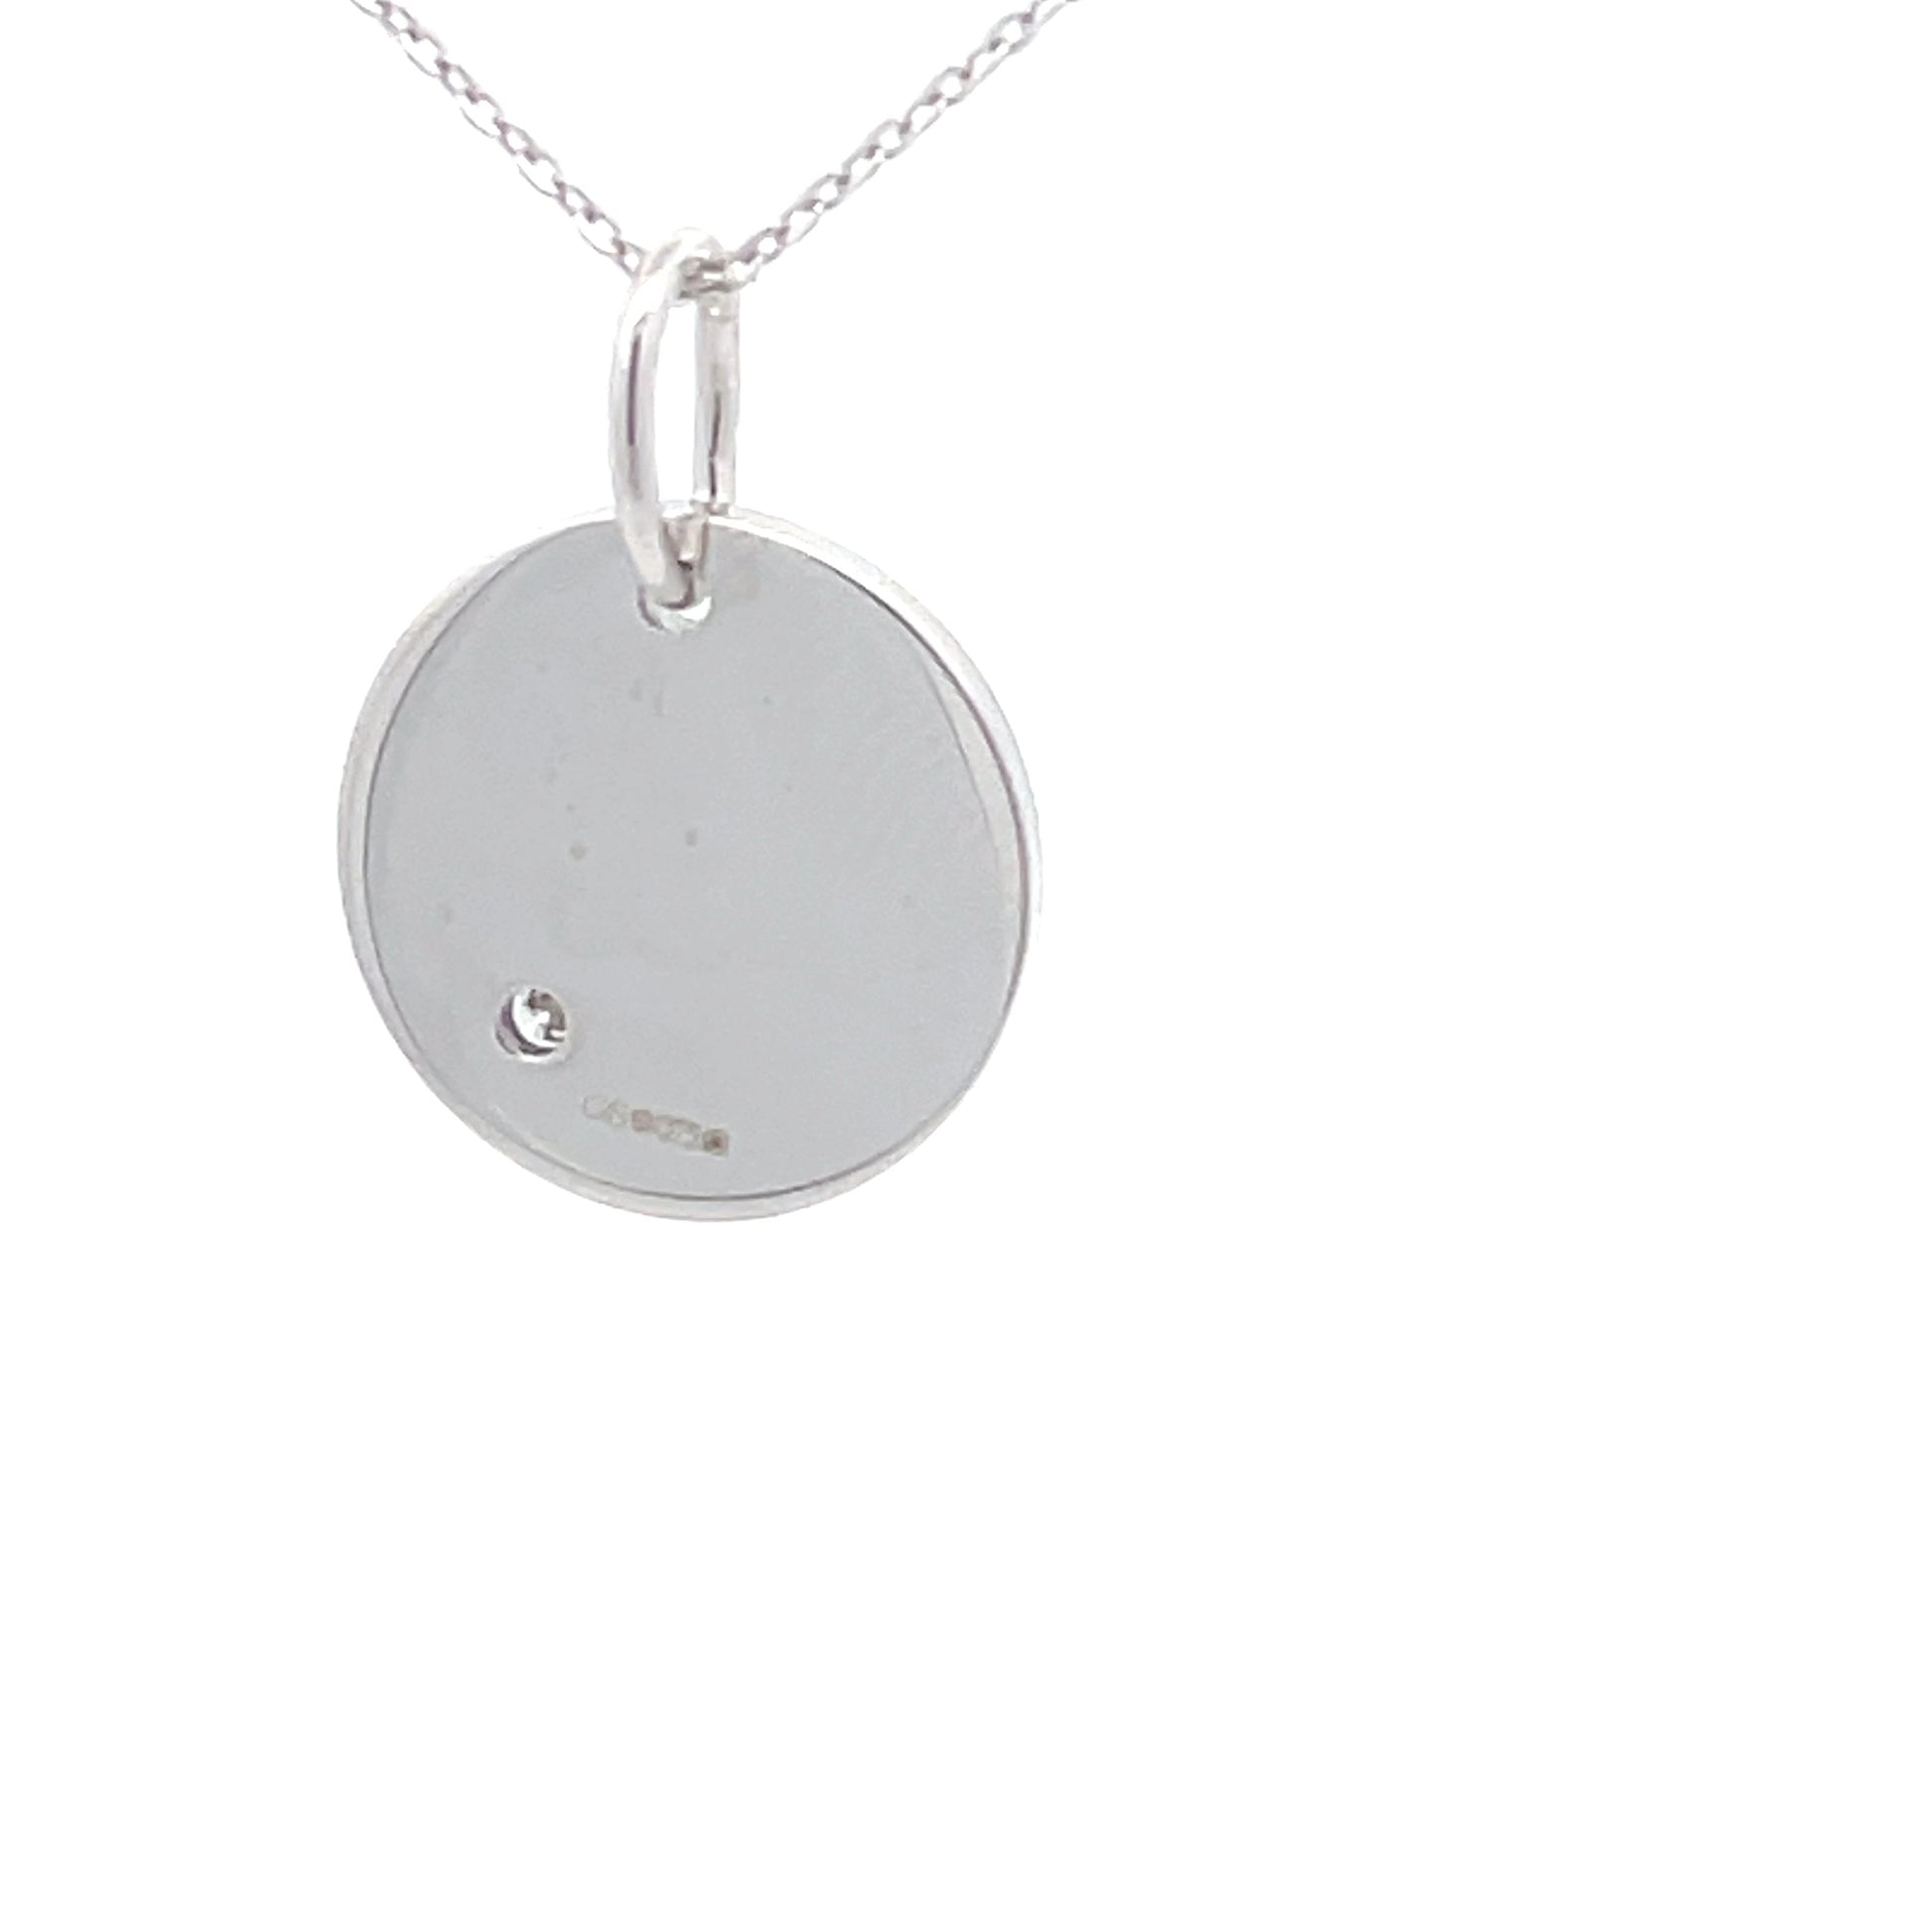 White Gold Round Disc Set With a Round Brilliant Cut Diamond  Gardiner Brothers   